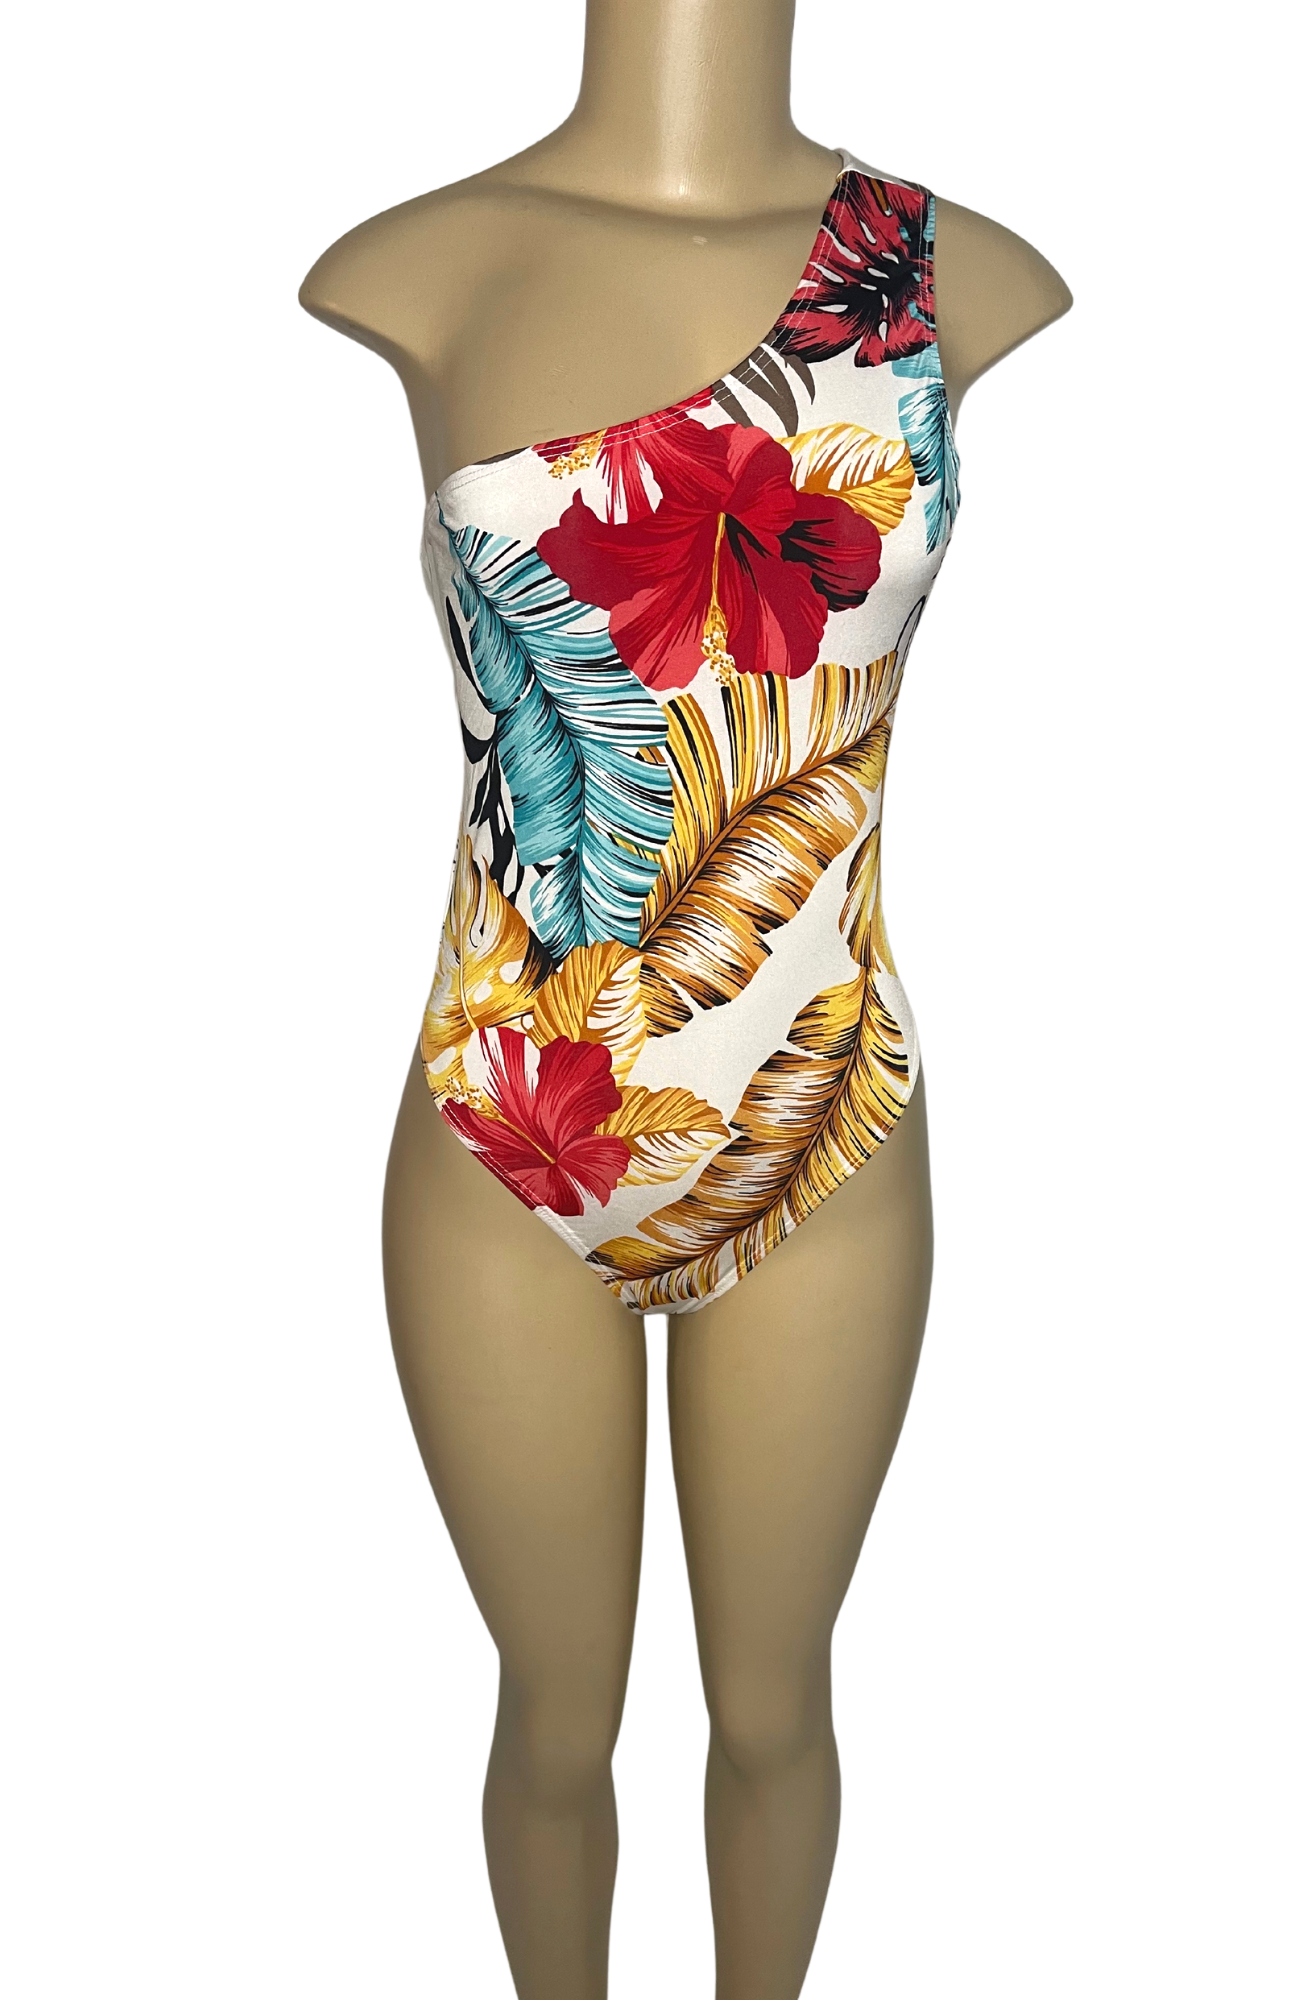 swim suit,yup she bad, yup she bad swim suit,swimwear, coverup,bodycon,pool party outfit,vacation outfit,